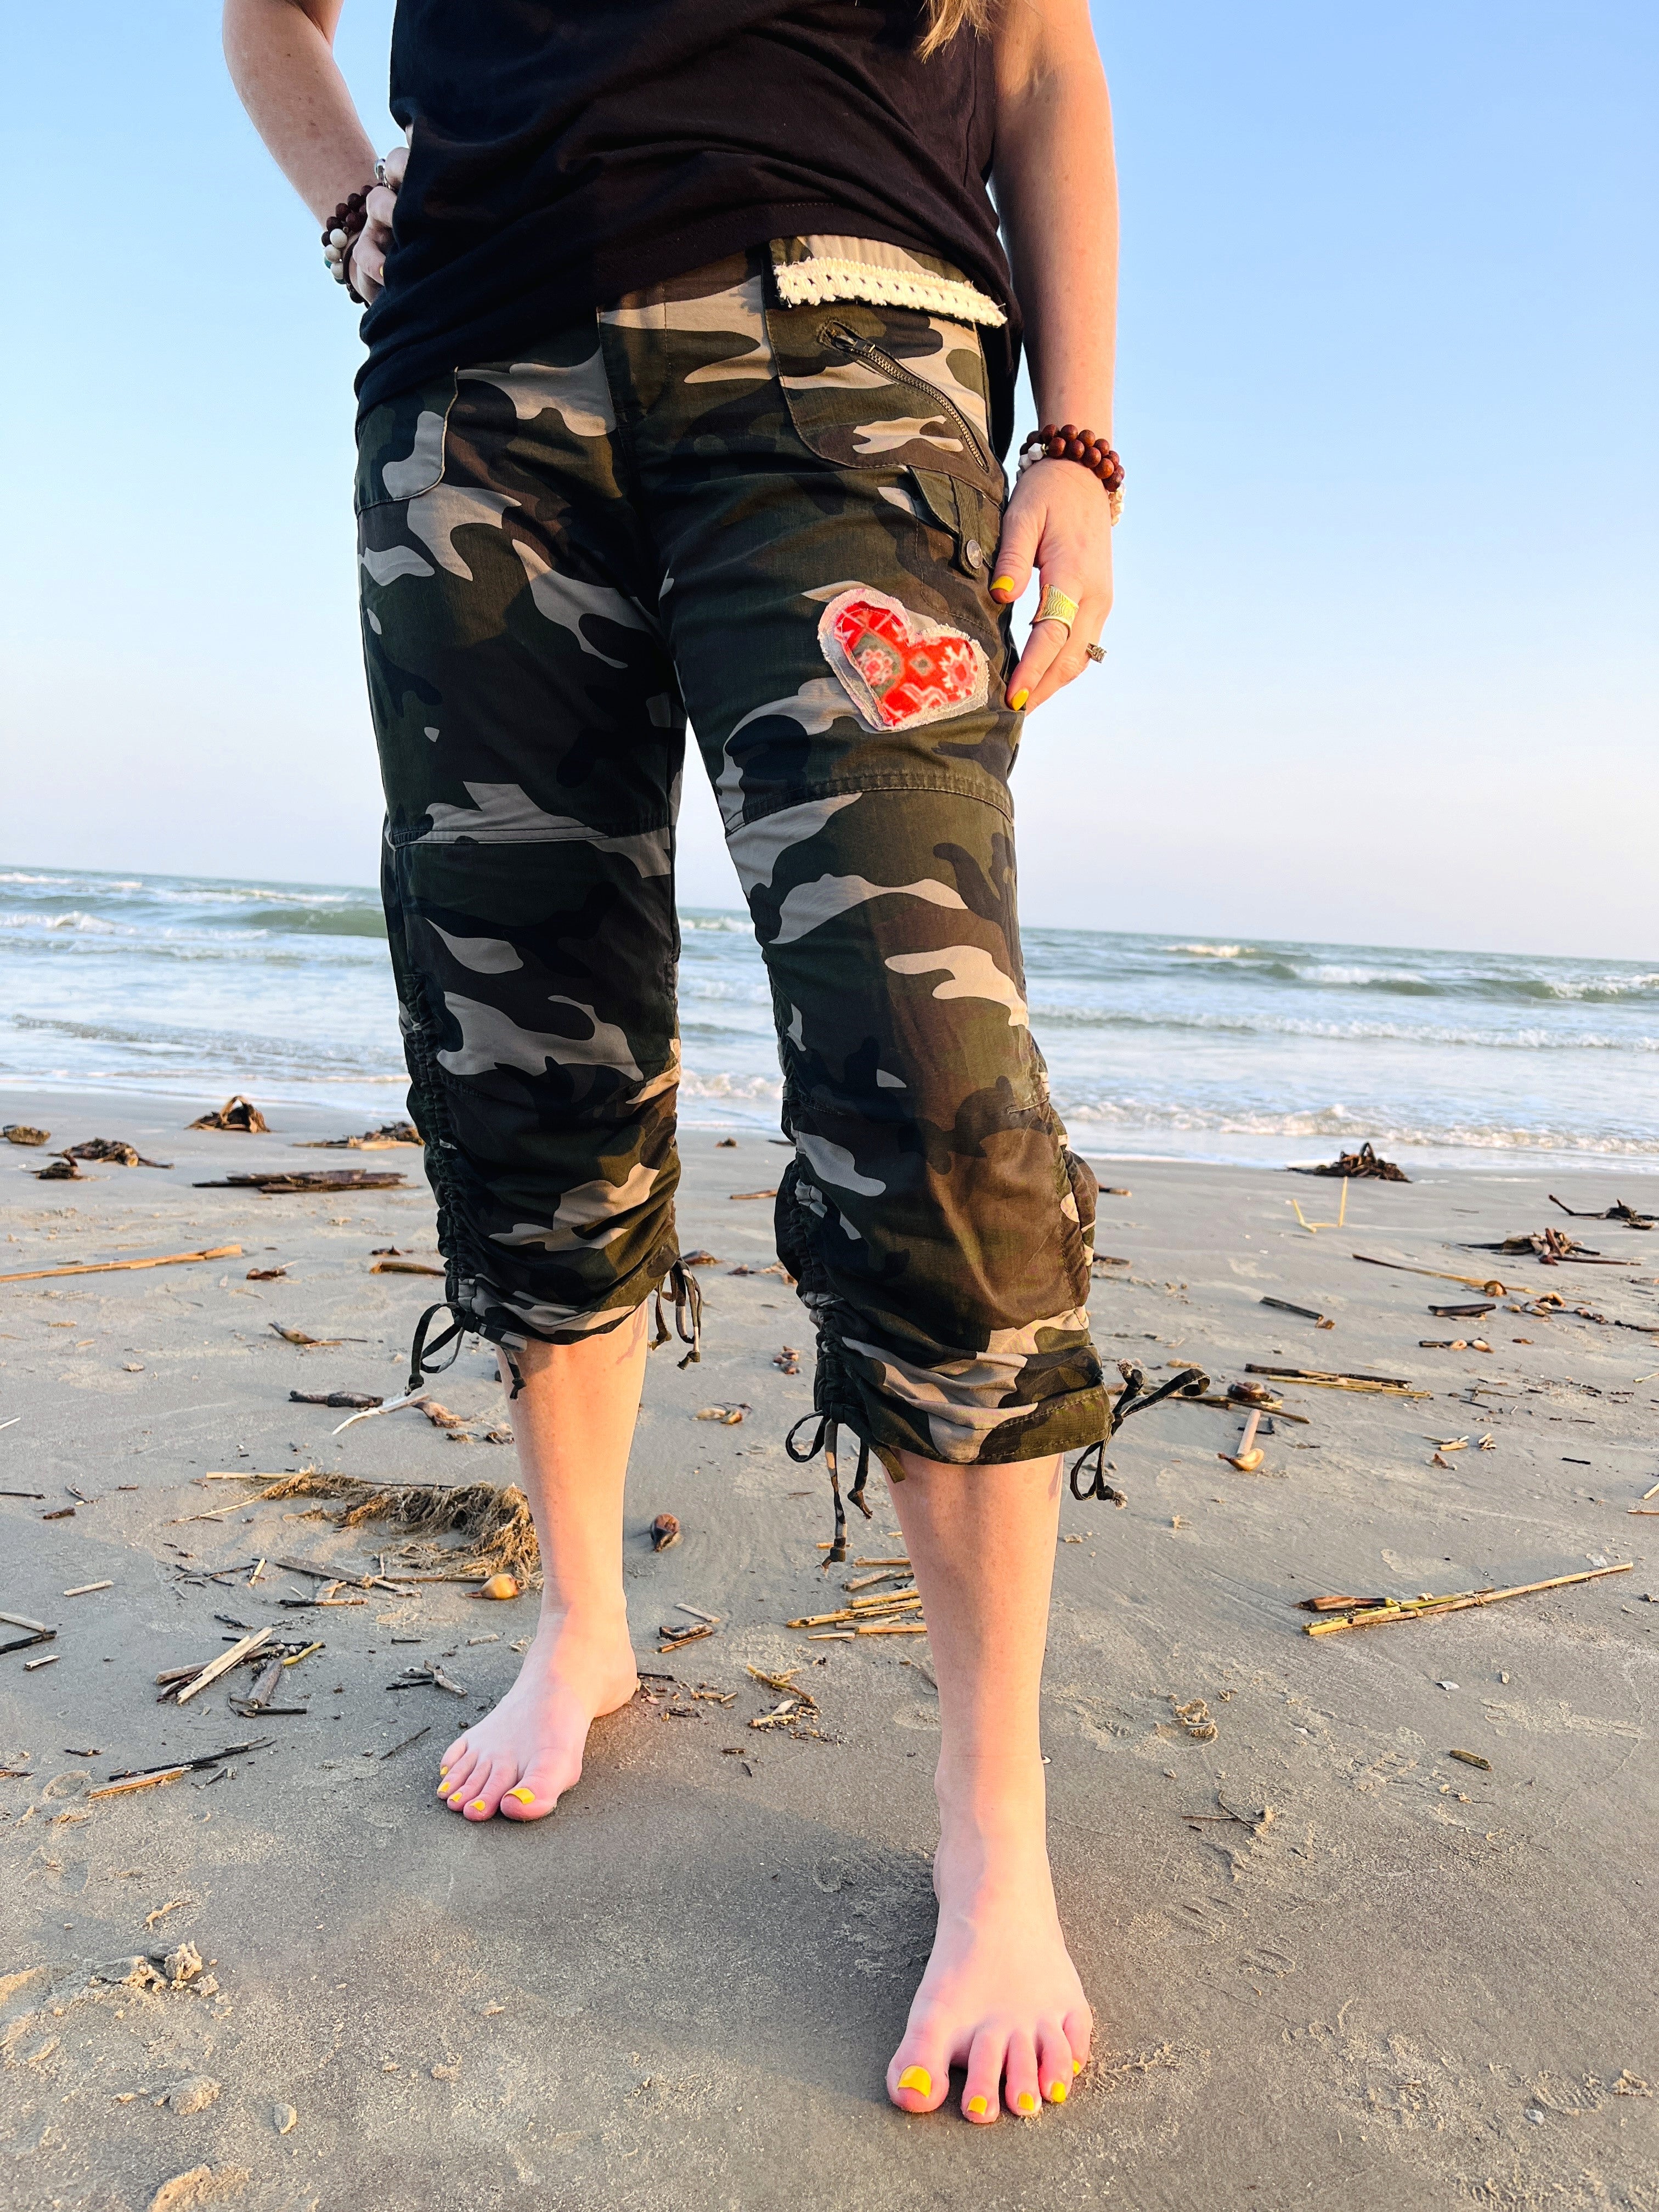 "Heartfelt Camo" – Refurbished Cropped Camo Pants with Artisan Touches